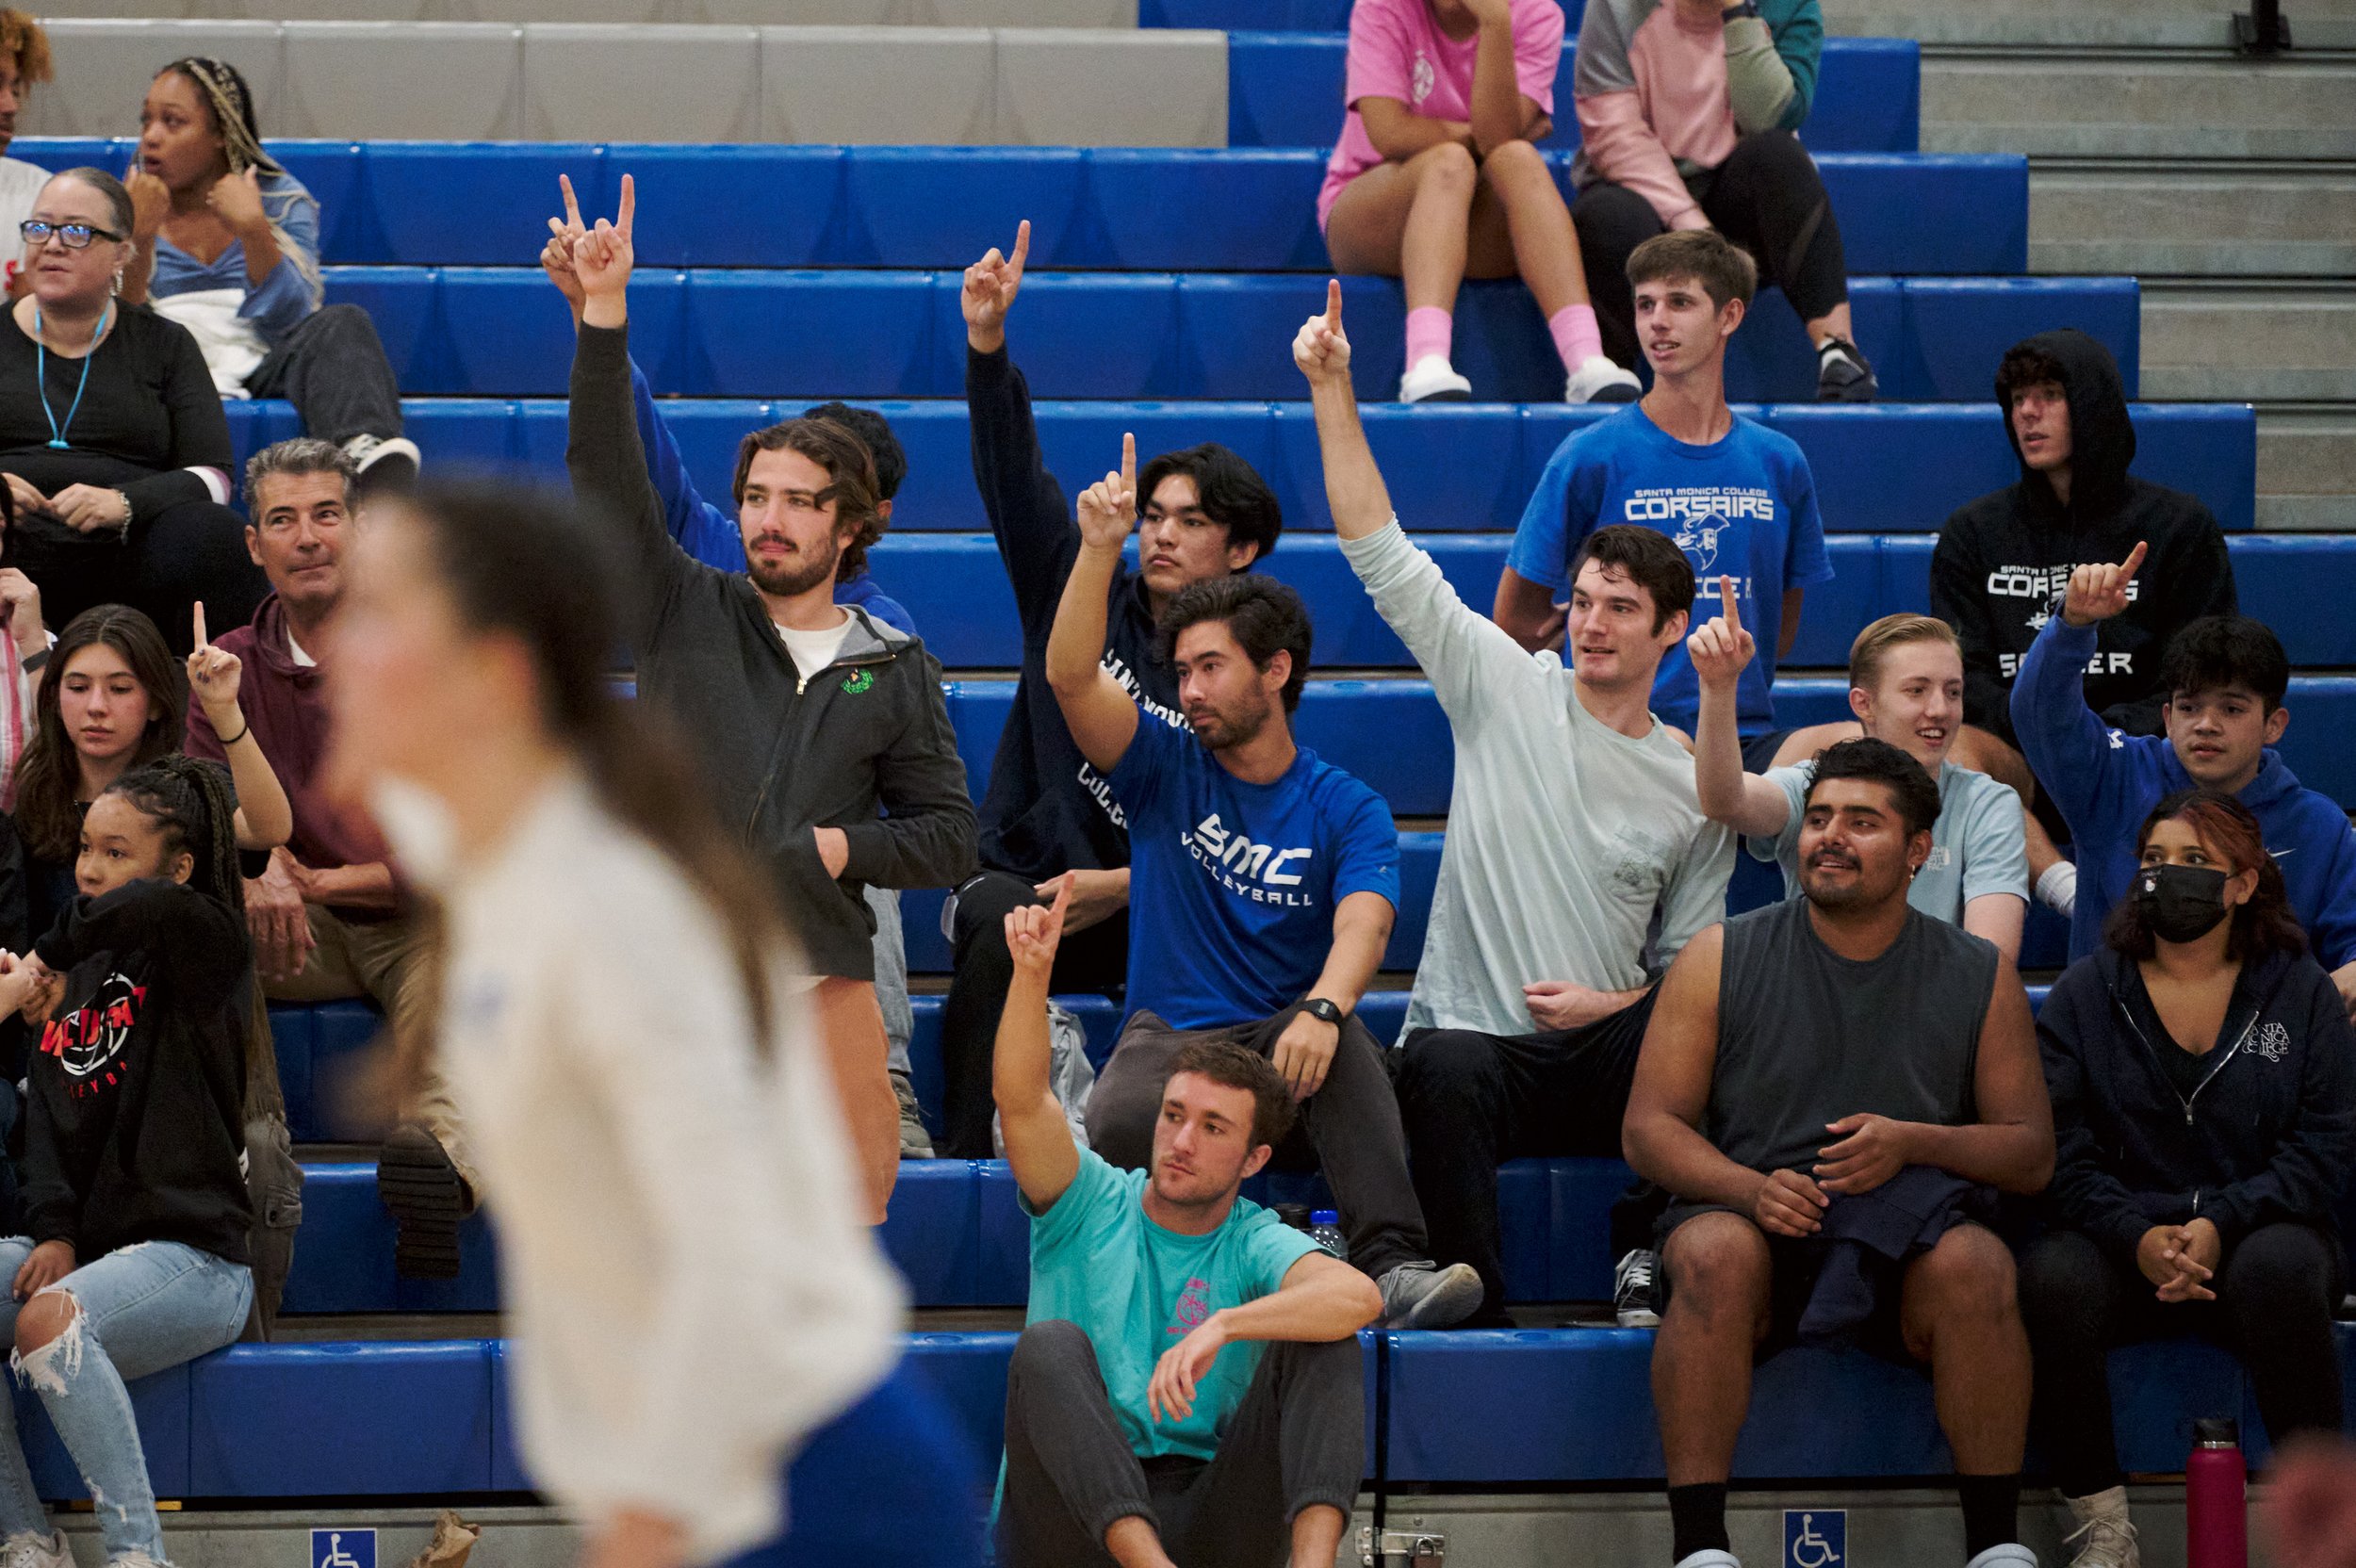  Members of the Santa Monica College Corsairs Men's Volleyball team hold up one finger in support of the women's team needing one more point to win the game against the West Los Angeles College Wildcats on Wednesday, Oct. 26, 2022, at SMC Gym in Sant